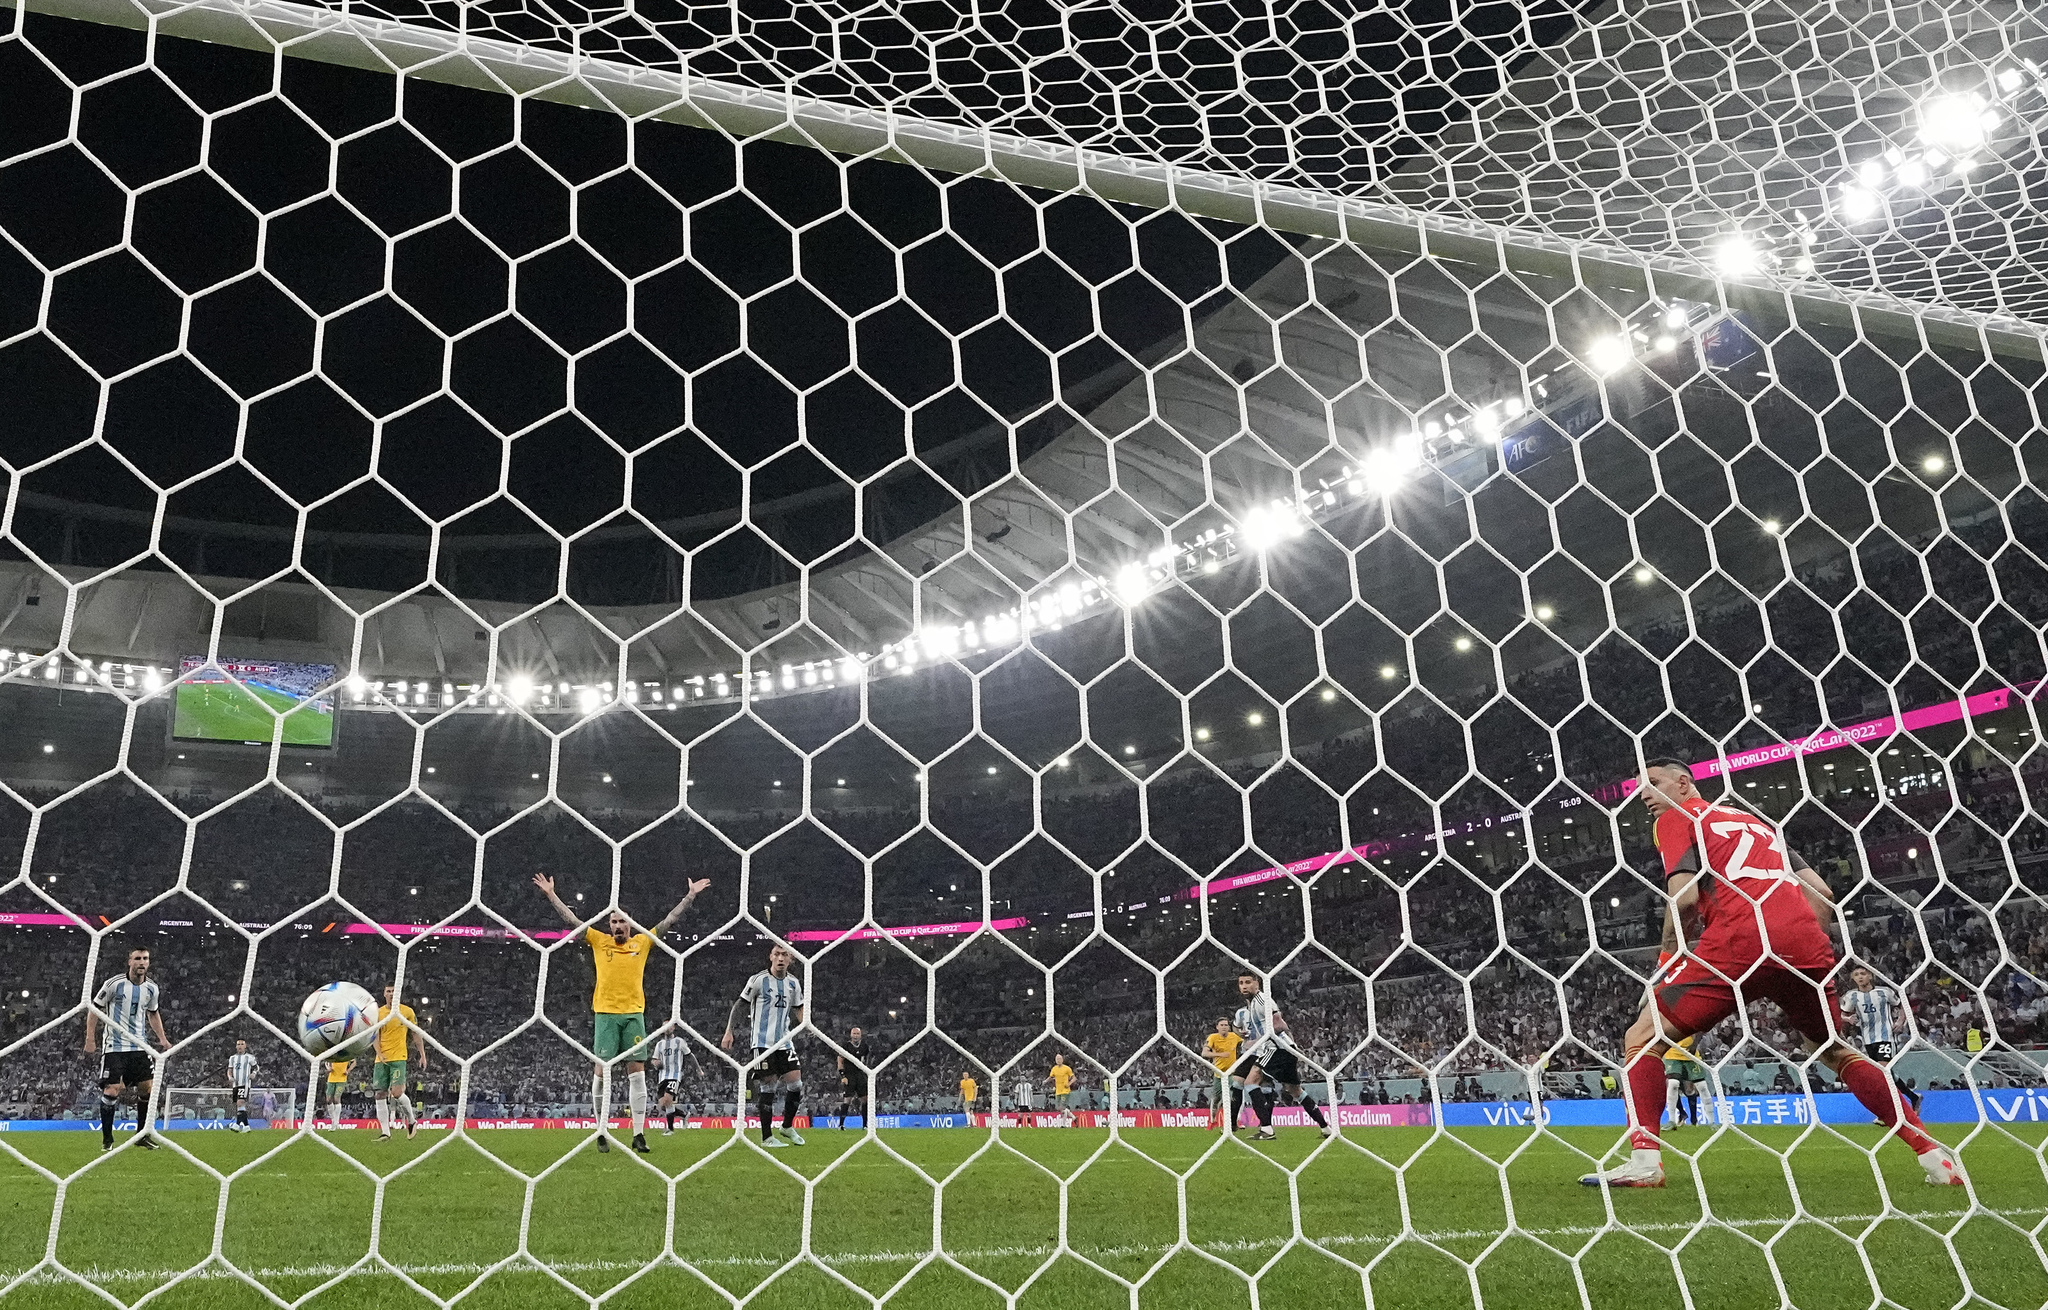 Argentina's goalkeeper Emiliano Martinez looks on as a deflected shot fromAustralia's Craig Goodwin goes into the net 